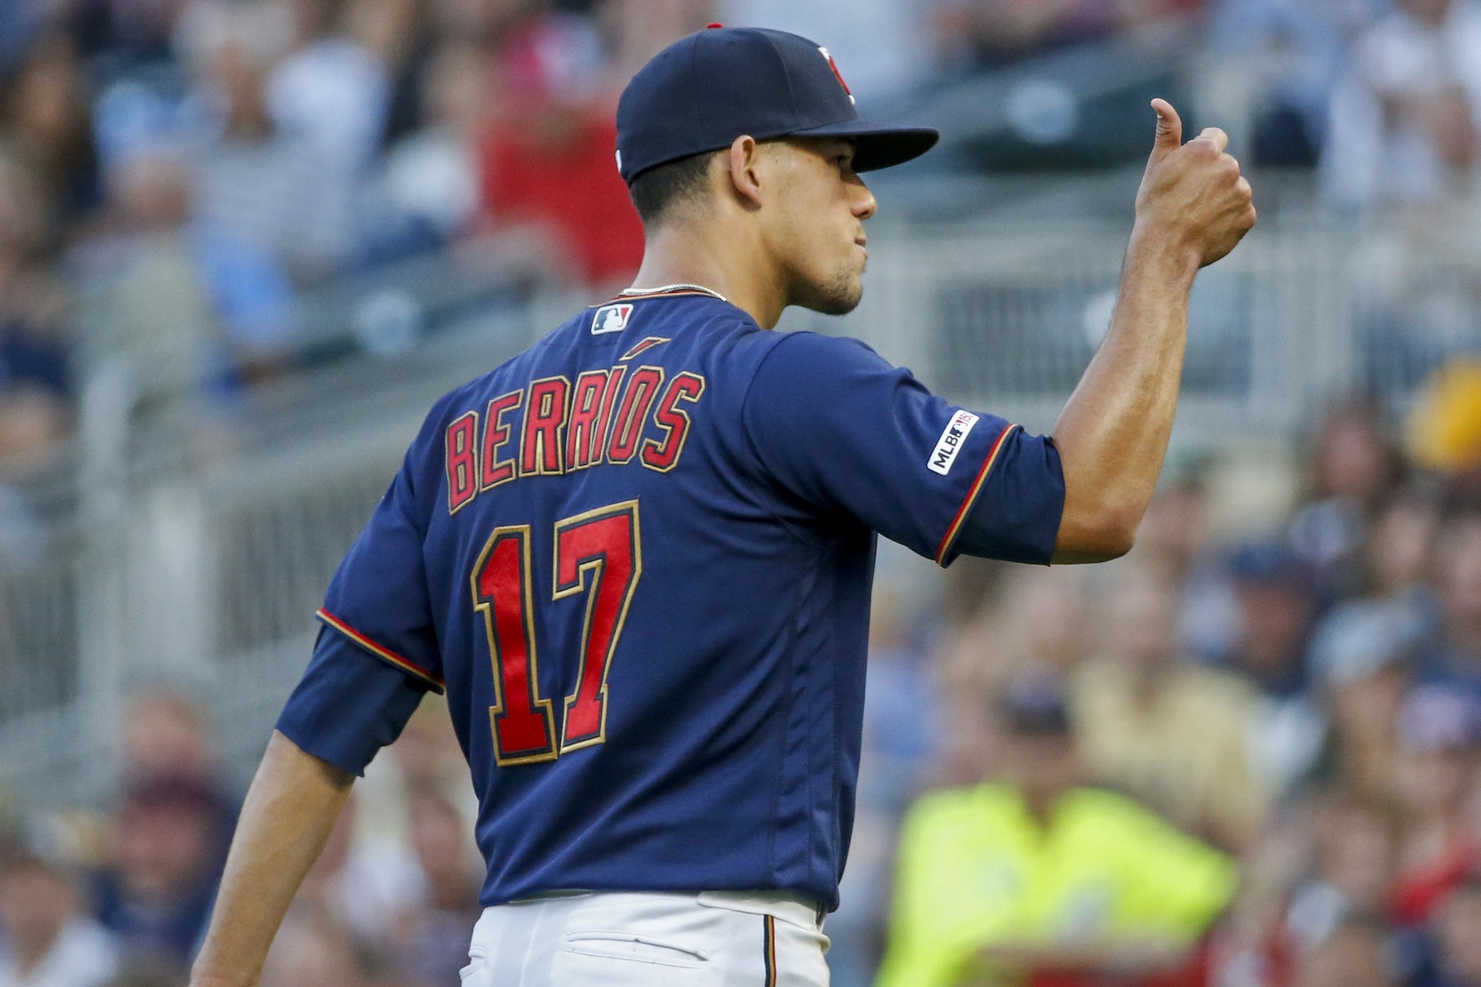 Jose Berrios grew up with the Twins. Now he'll try to beat them.